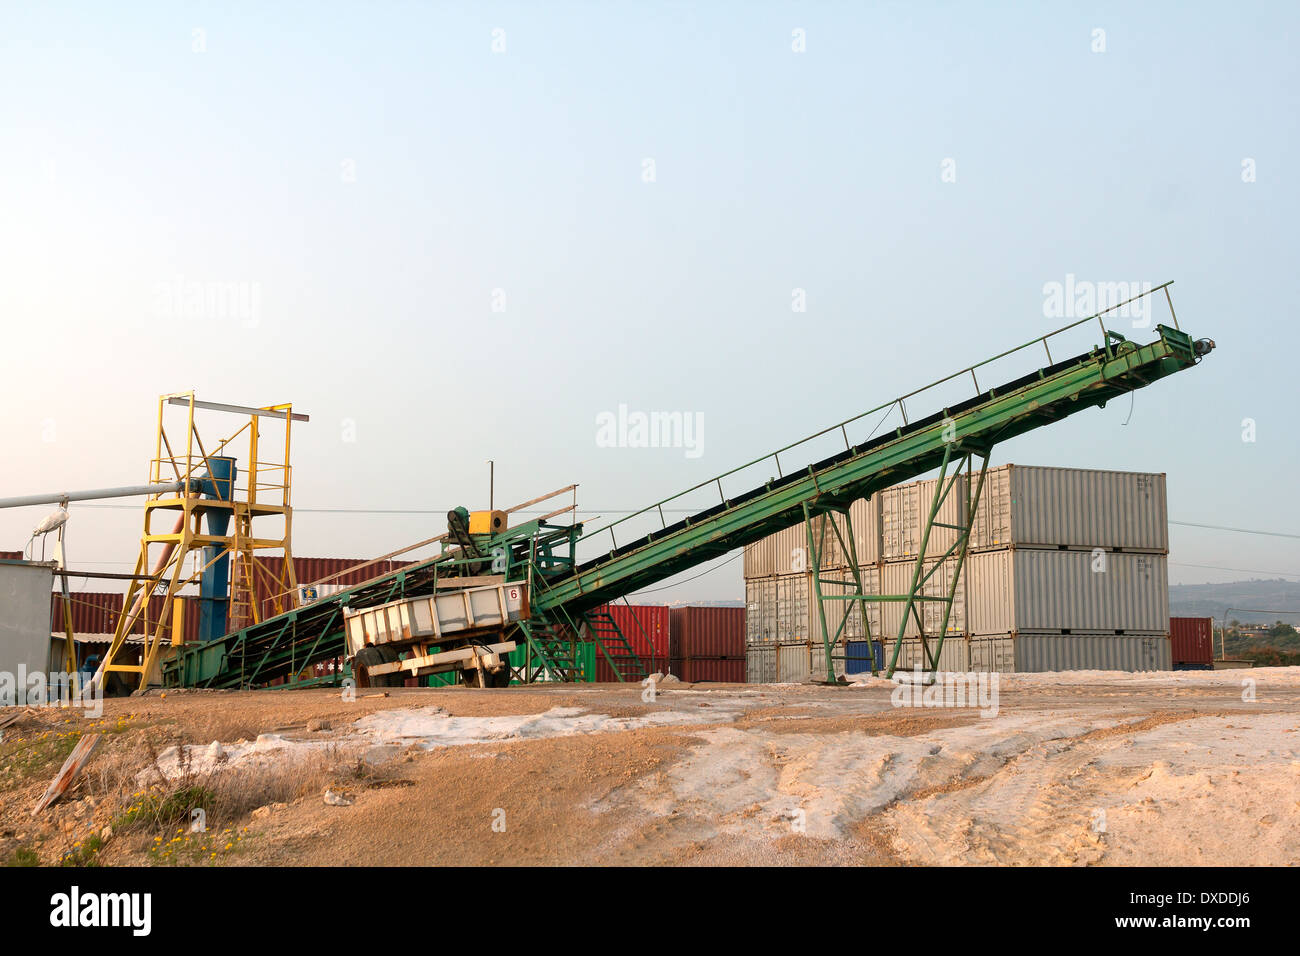 Plant for the extraction of salt in Israel Stock Photo